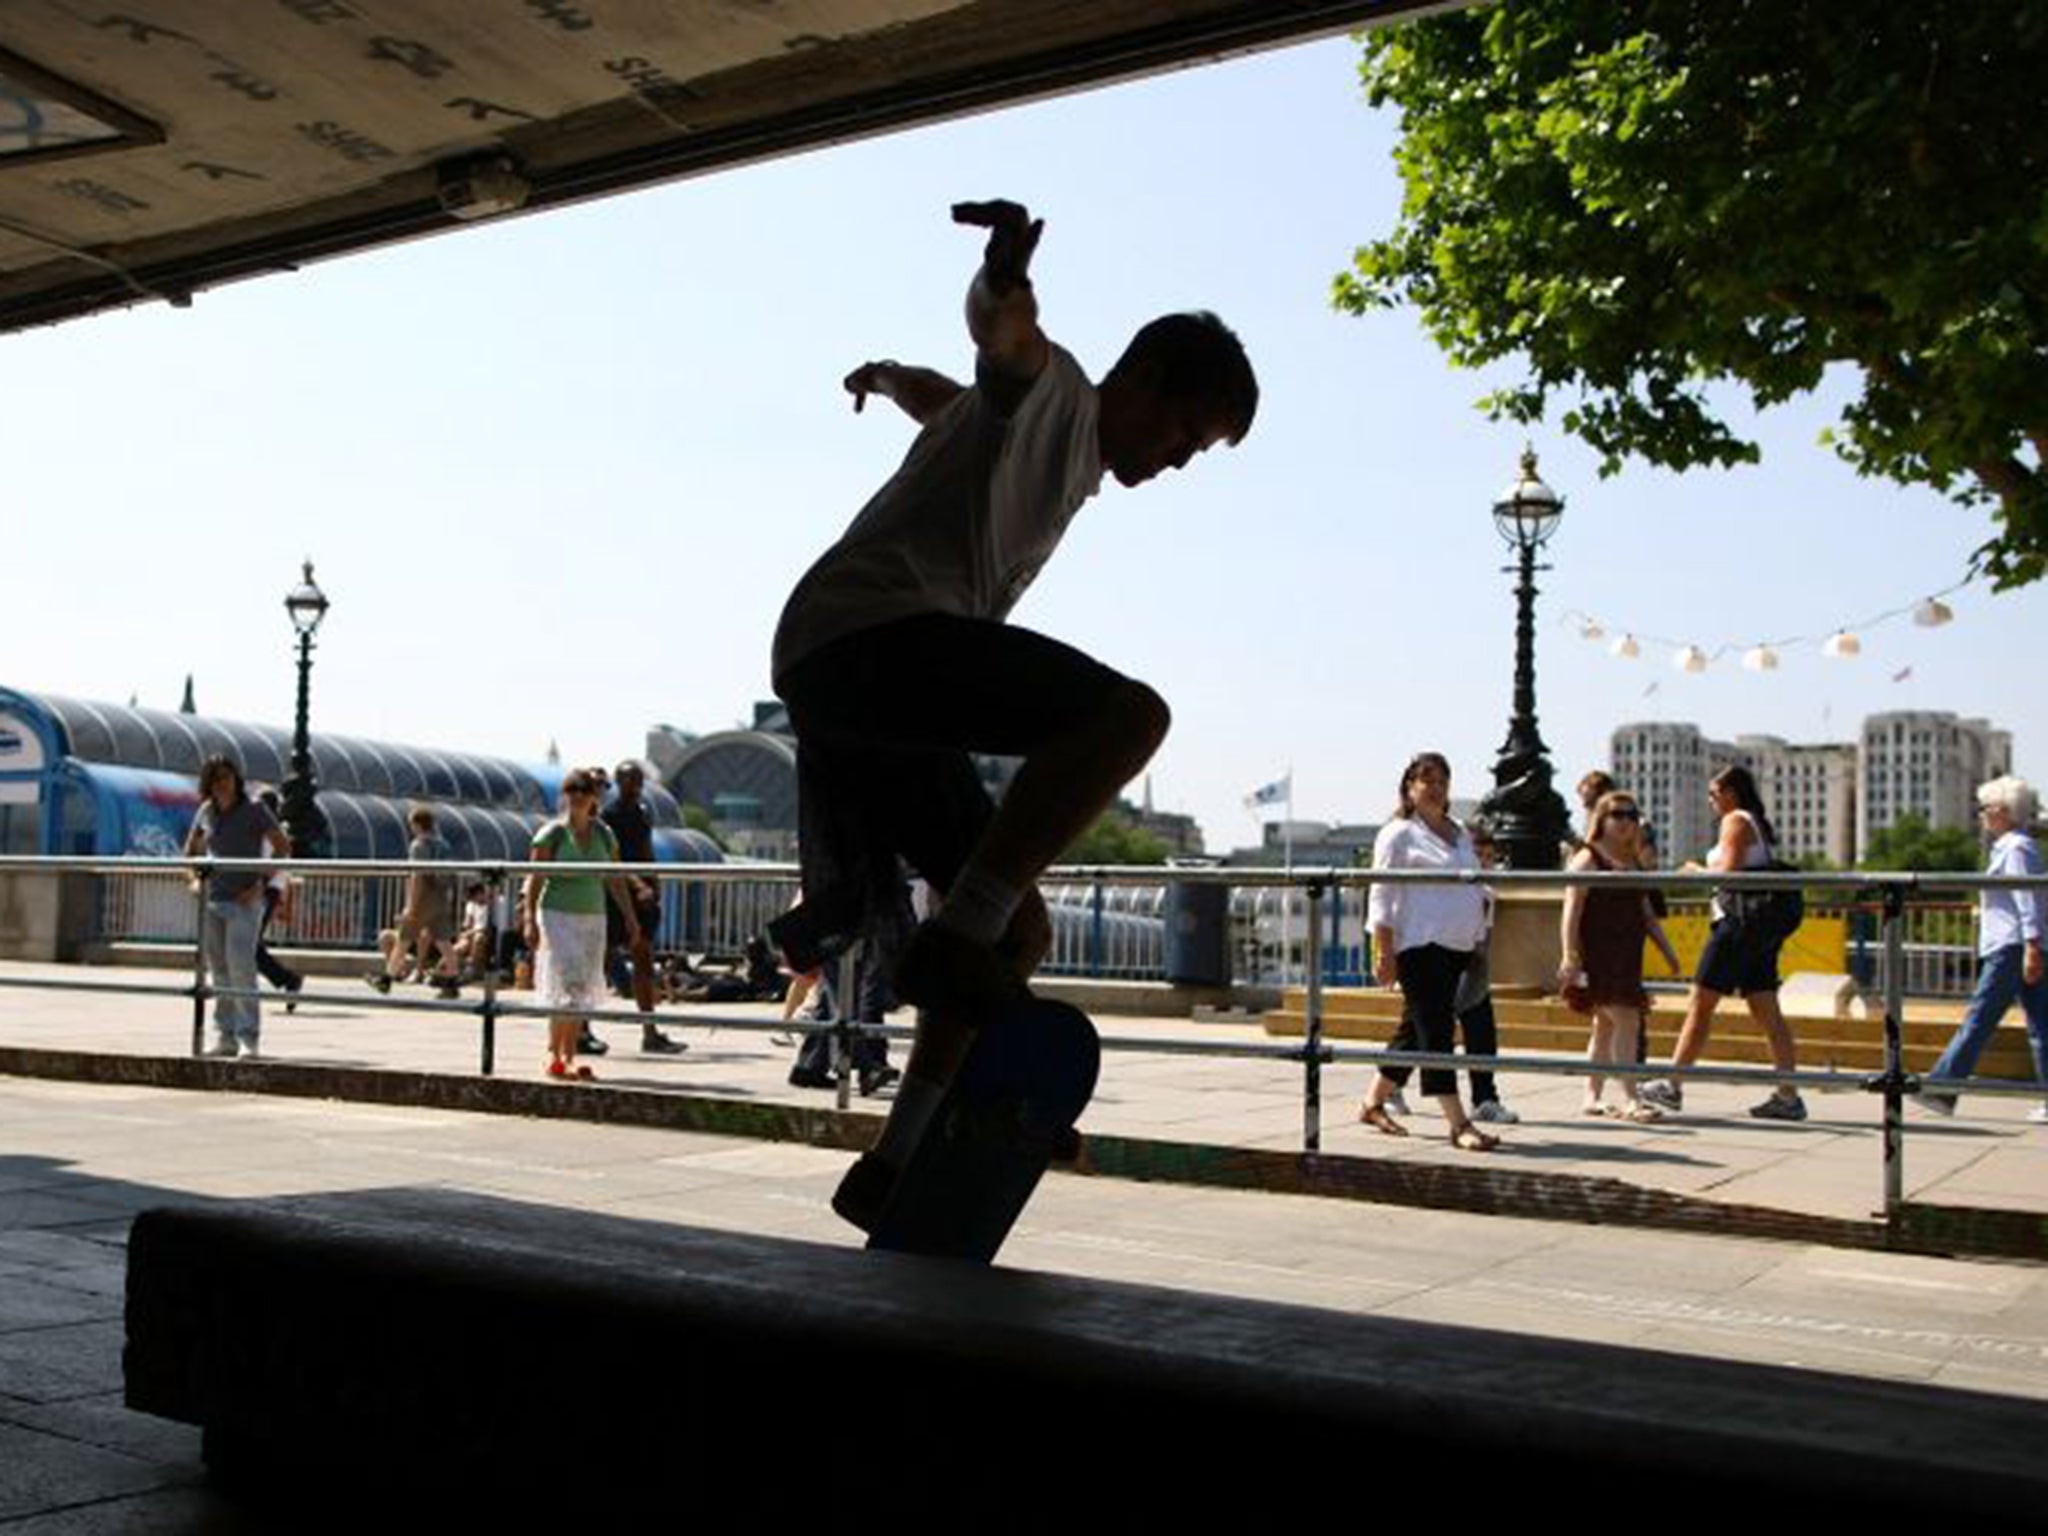 An increasing number of local authorities are trying to outlaw skateboarding in public spaces using a new breed of control order